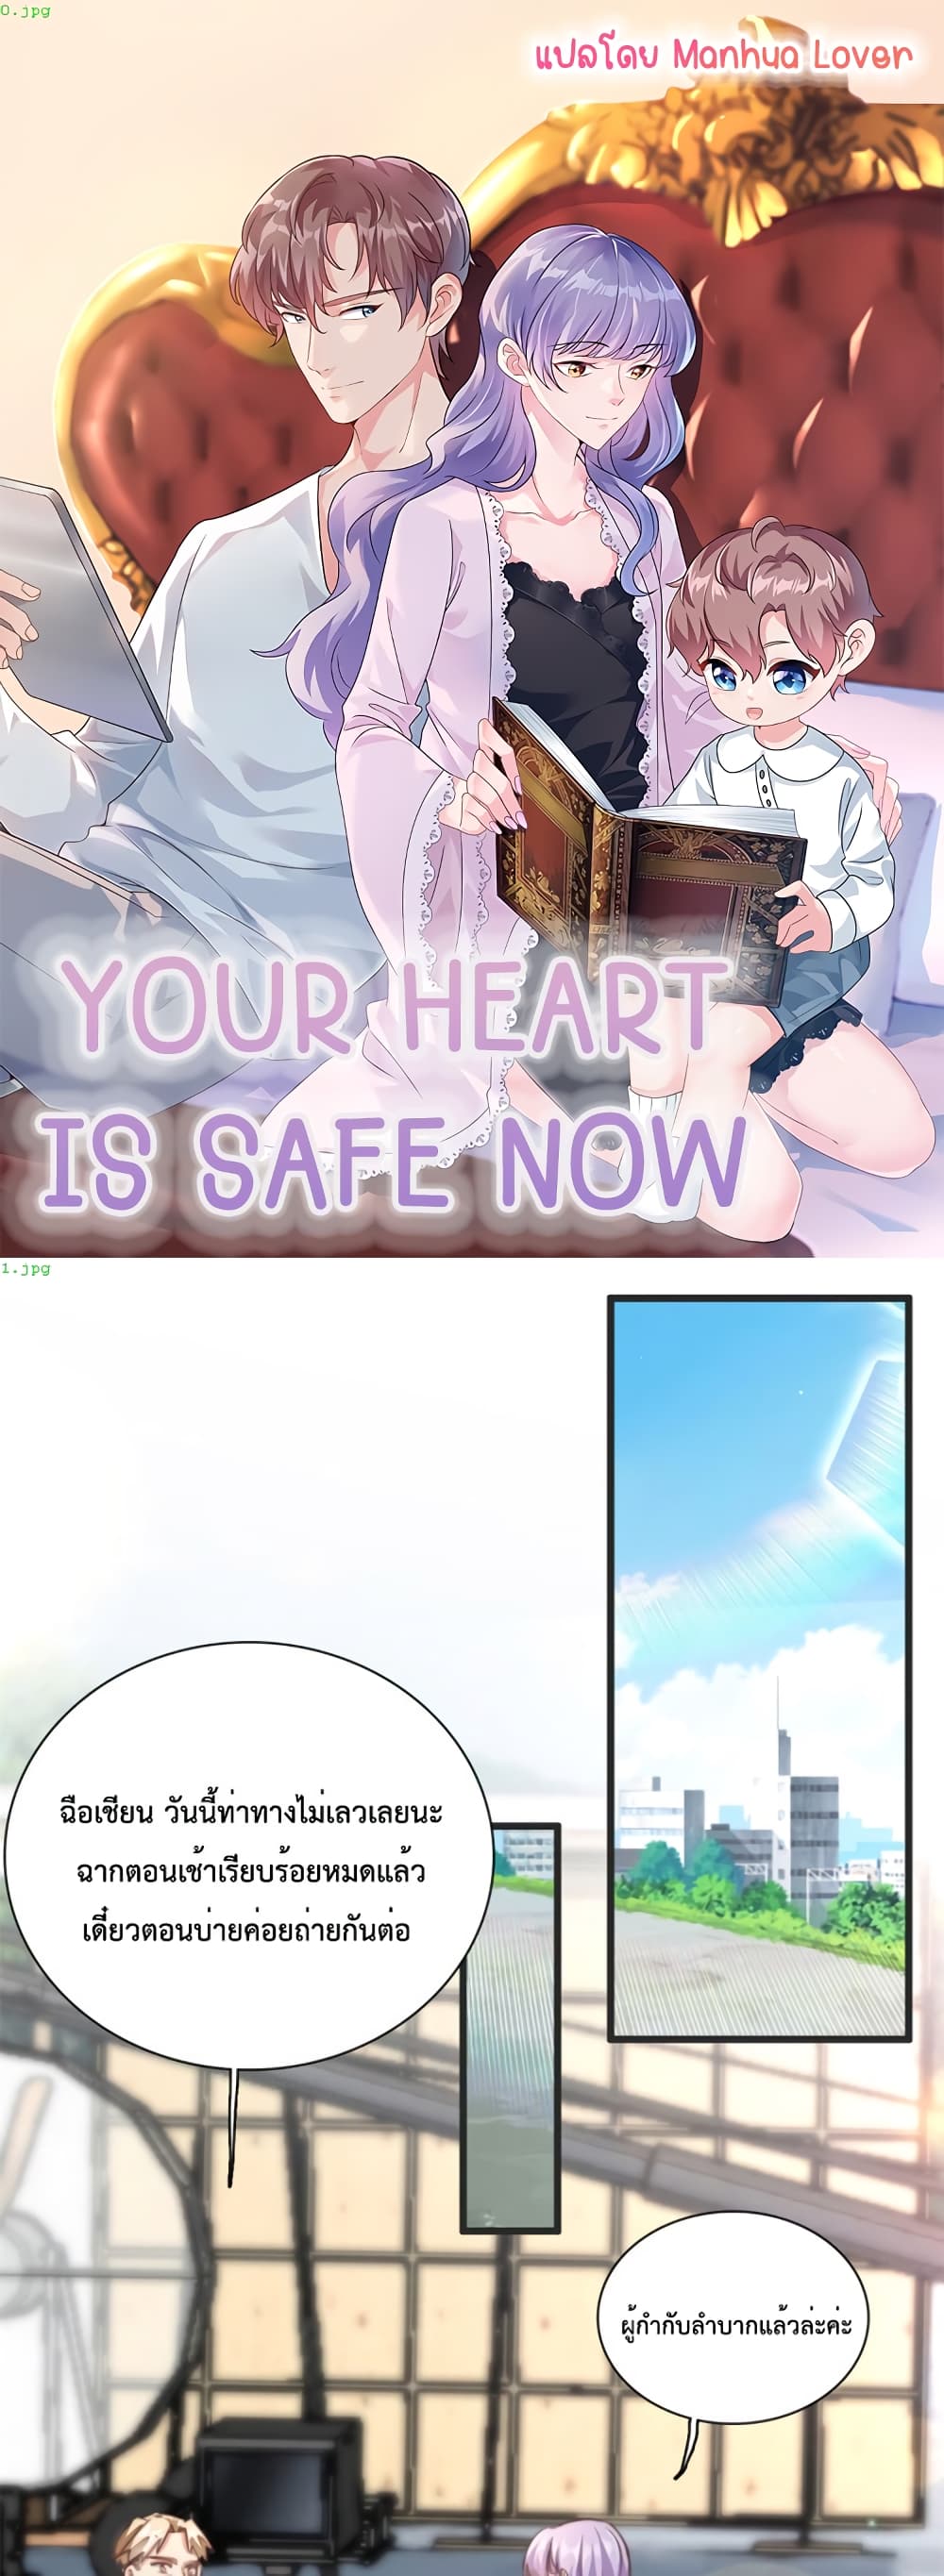 Your Heart Is Safe Now 34-34